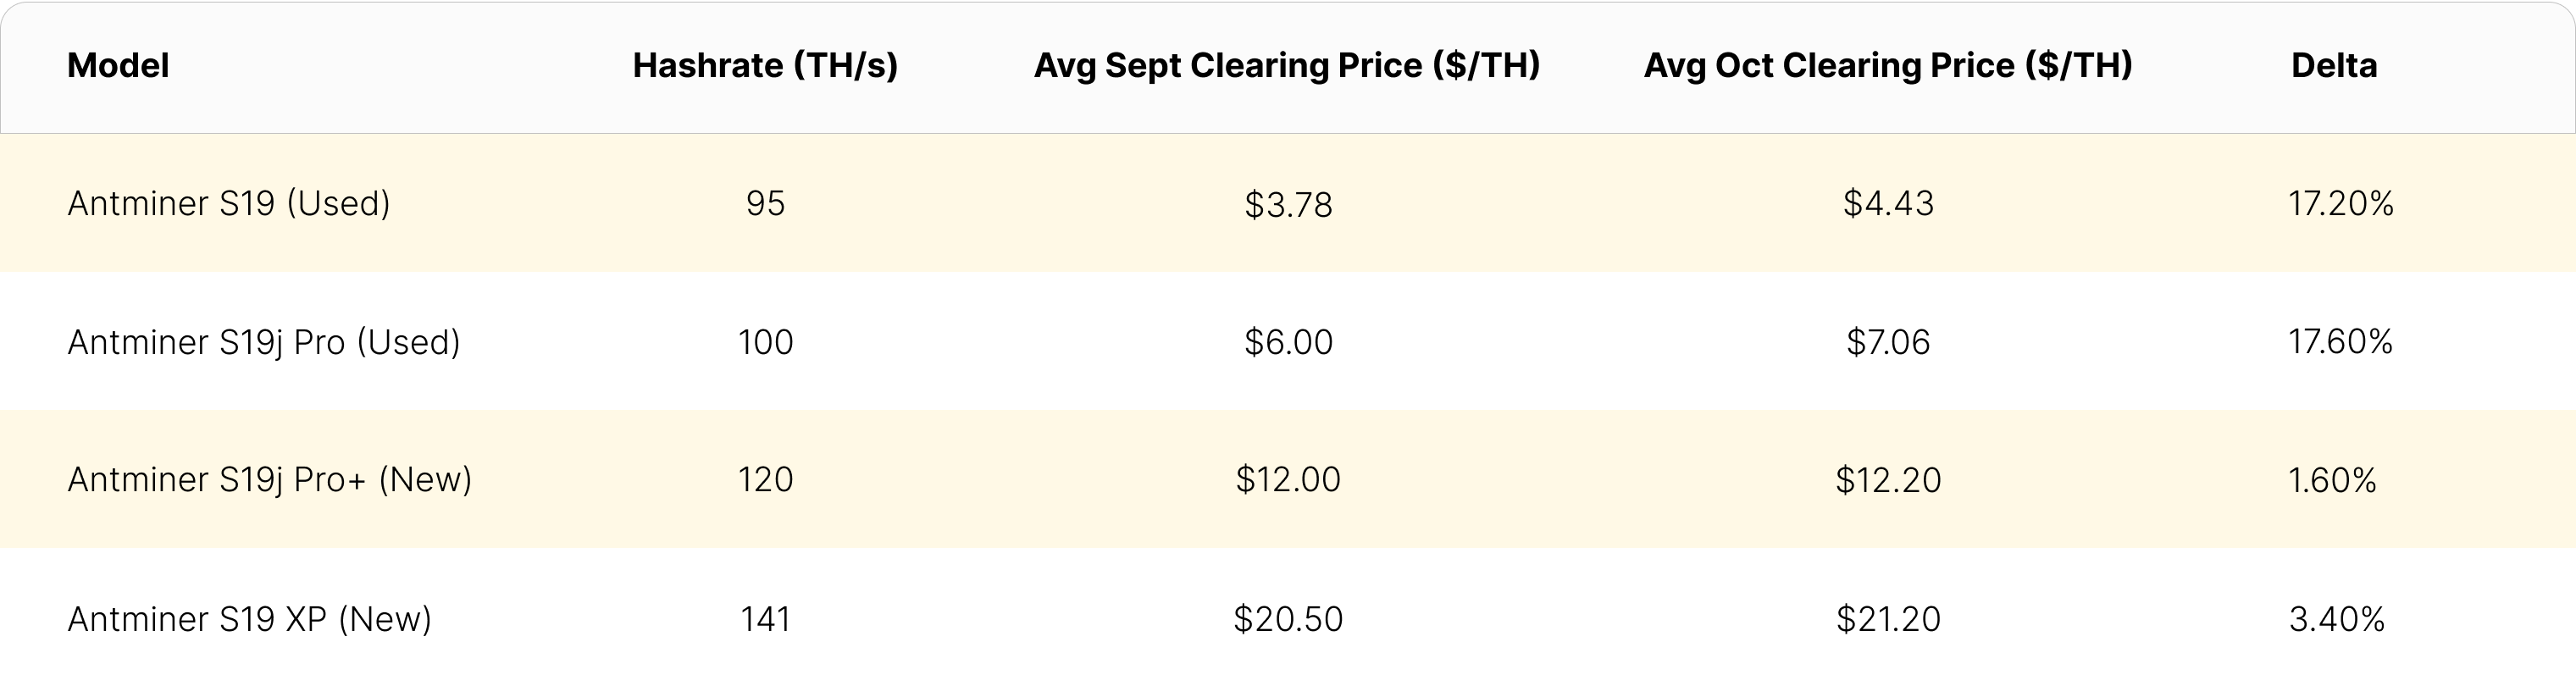 Luxor RFQ average clearing price spreads from September to October 2023 for the S19, S19j Pro, S19j Pro+, and S19 XP